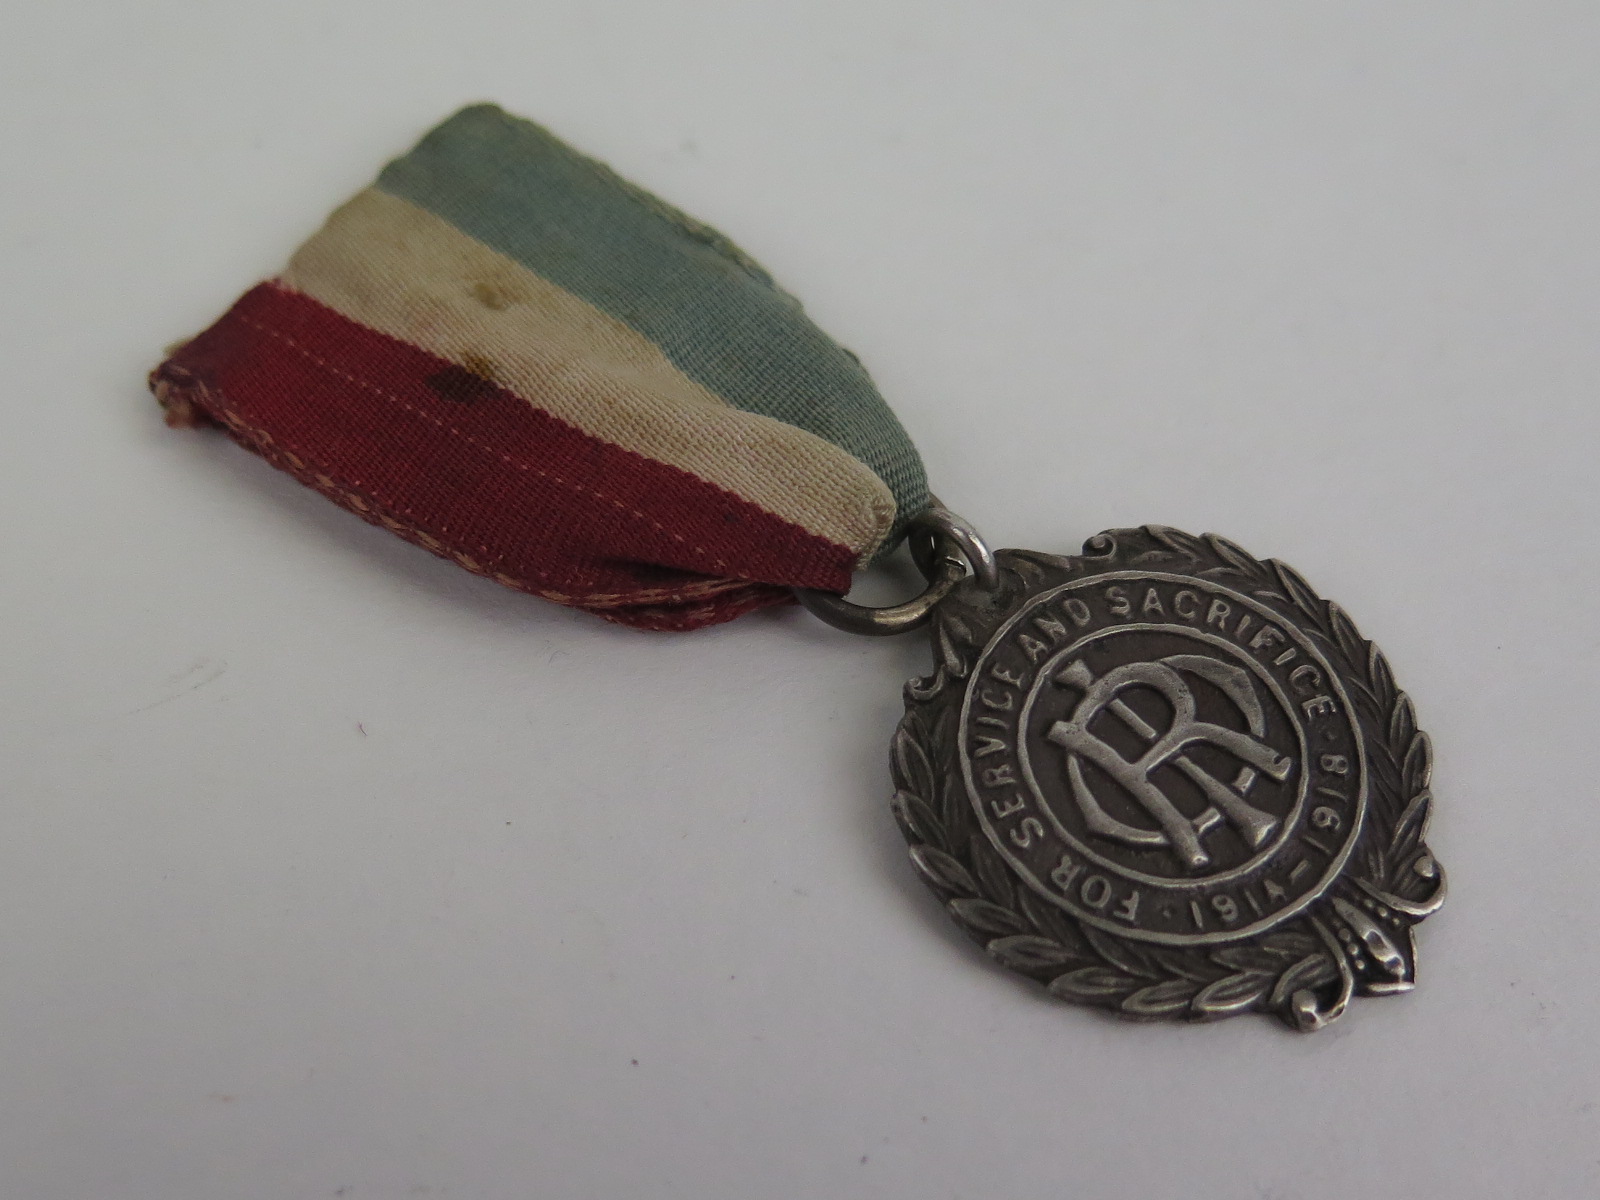 Tribute Medal (unmarked silver) 'I.O.R. For Service and Sacrifice 1914-1918'. (Independent Order